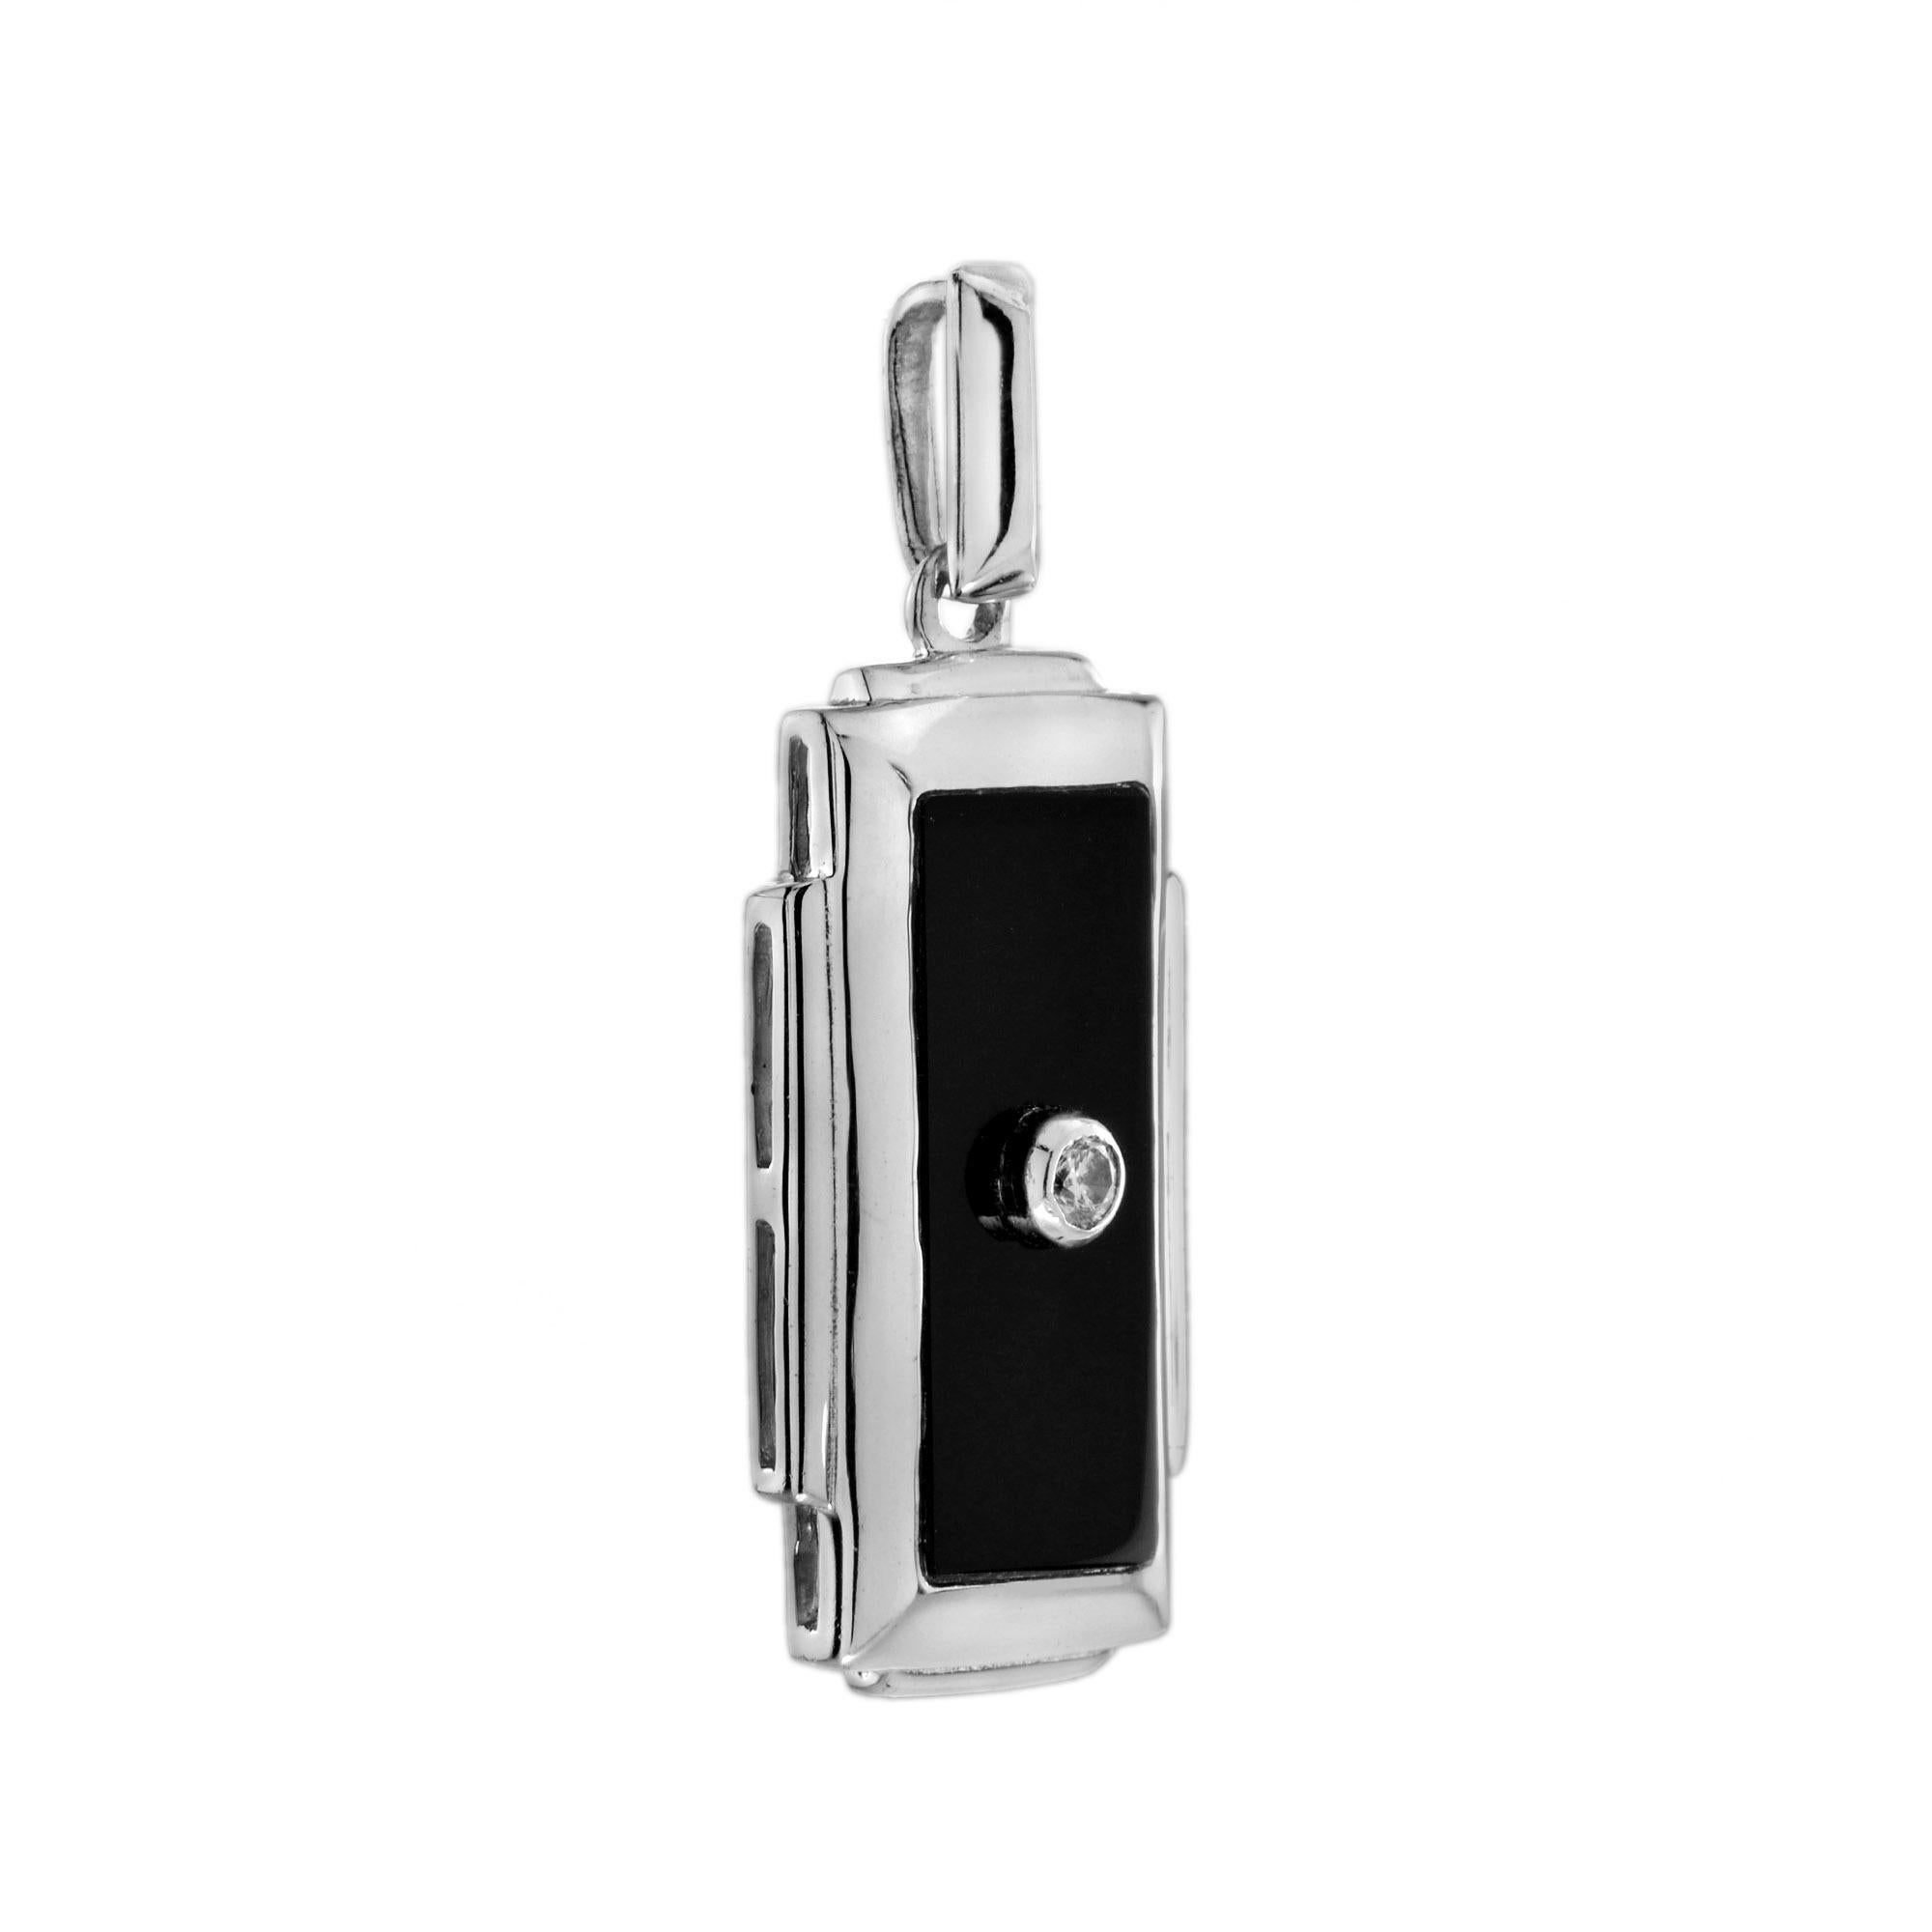 Square shaped onyx, brilliant round diamonds, and 14k white gold combine to create an eye-catching Art Deco-inspired pendant that can be worn by both male and female.

Information
Style: Art Deco
Metal: 14K White Gold
Width:13 mm.
Length: 35